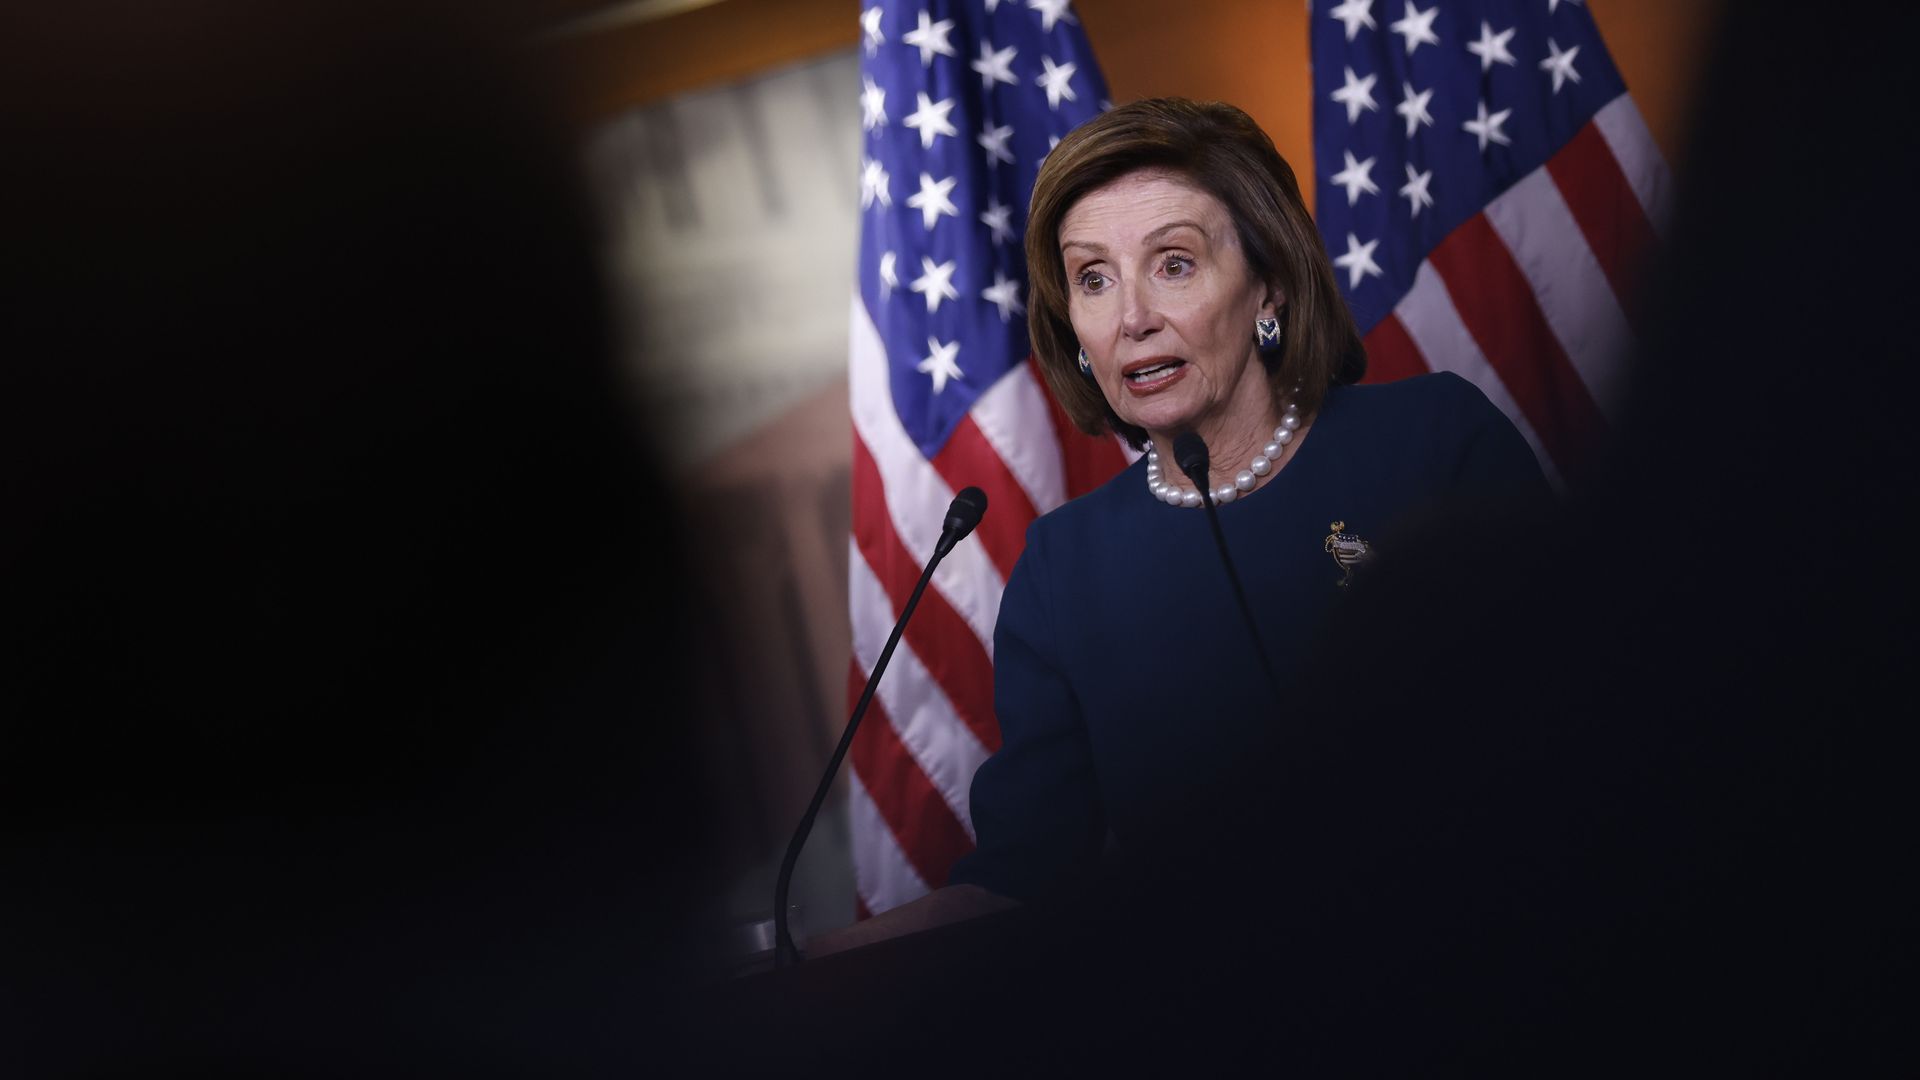 House Speaker Nancy Pelosi is seen speaking during a news conference.